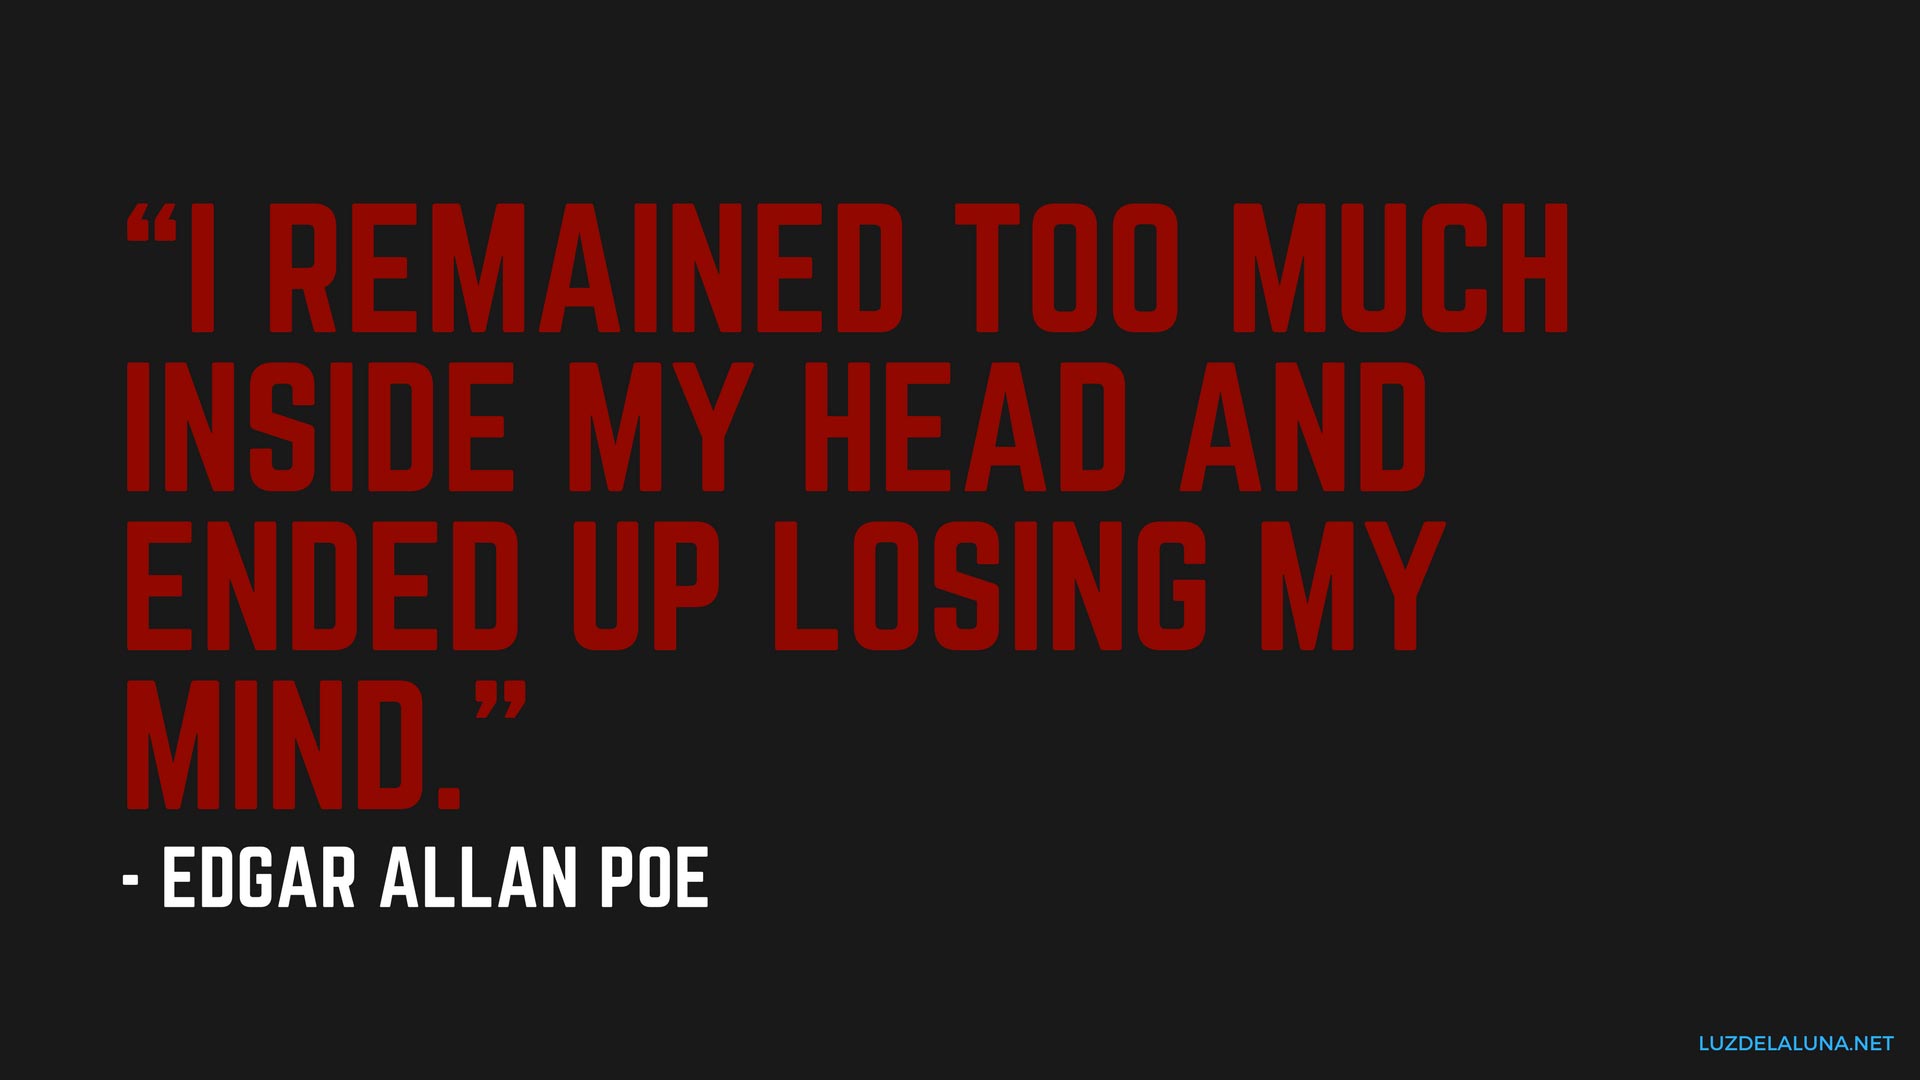 i remained too much inside my head and ended up losing my mind. edgar allan poe